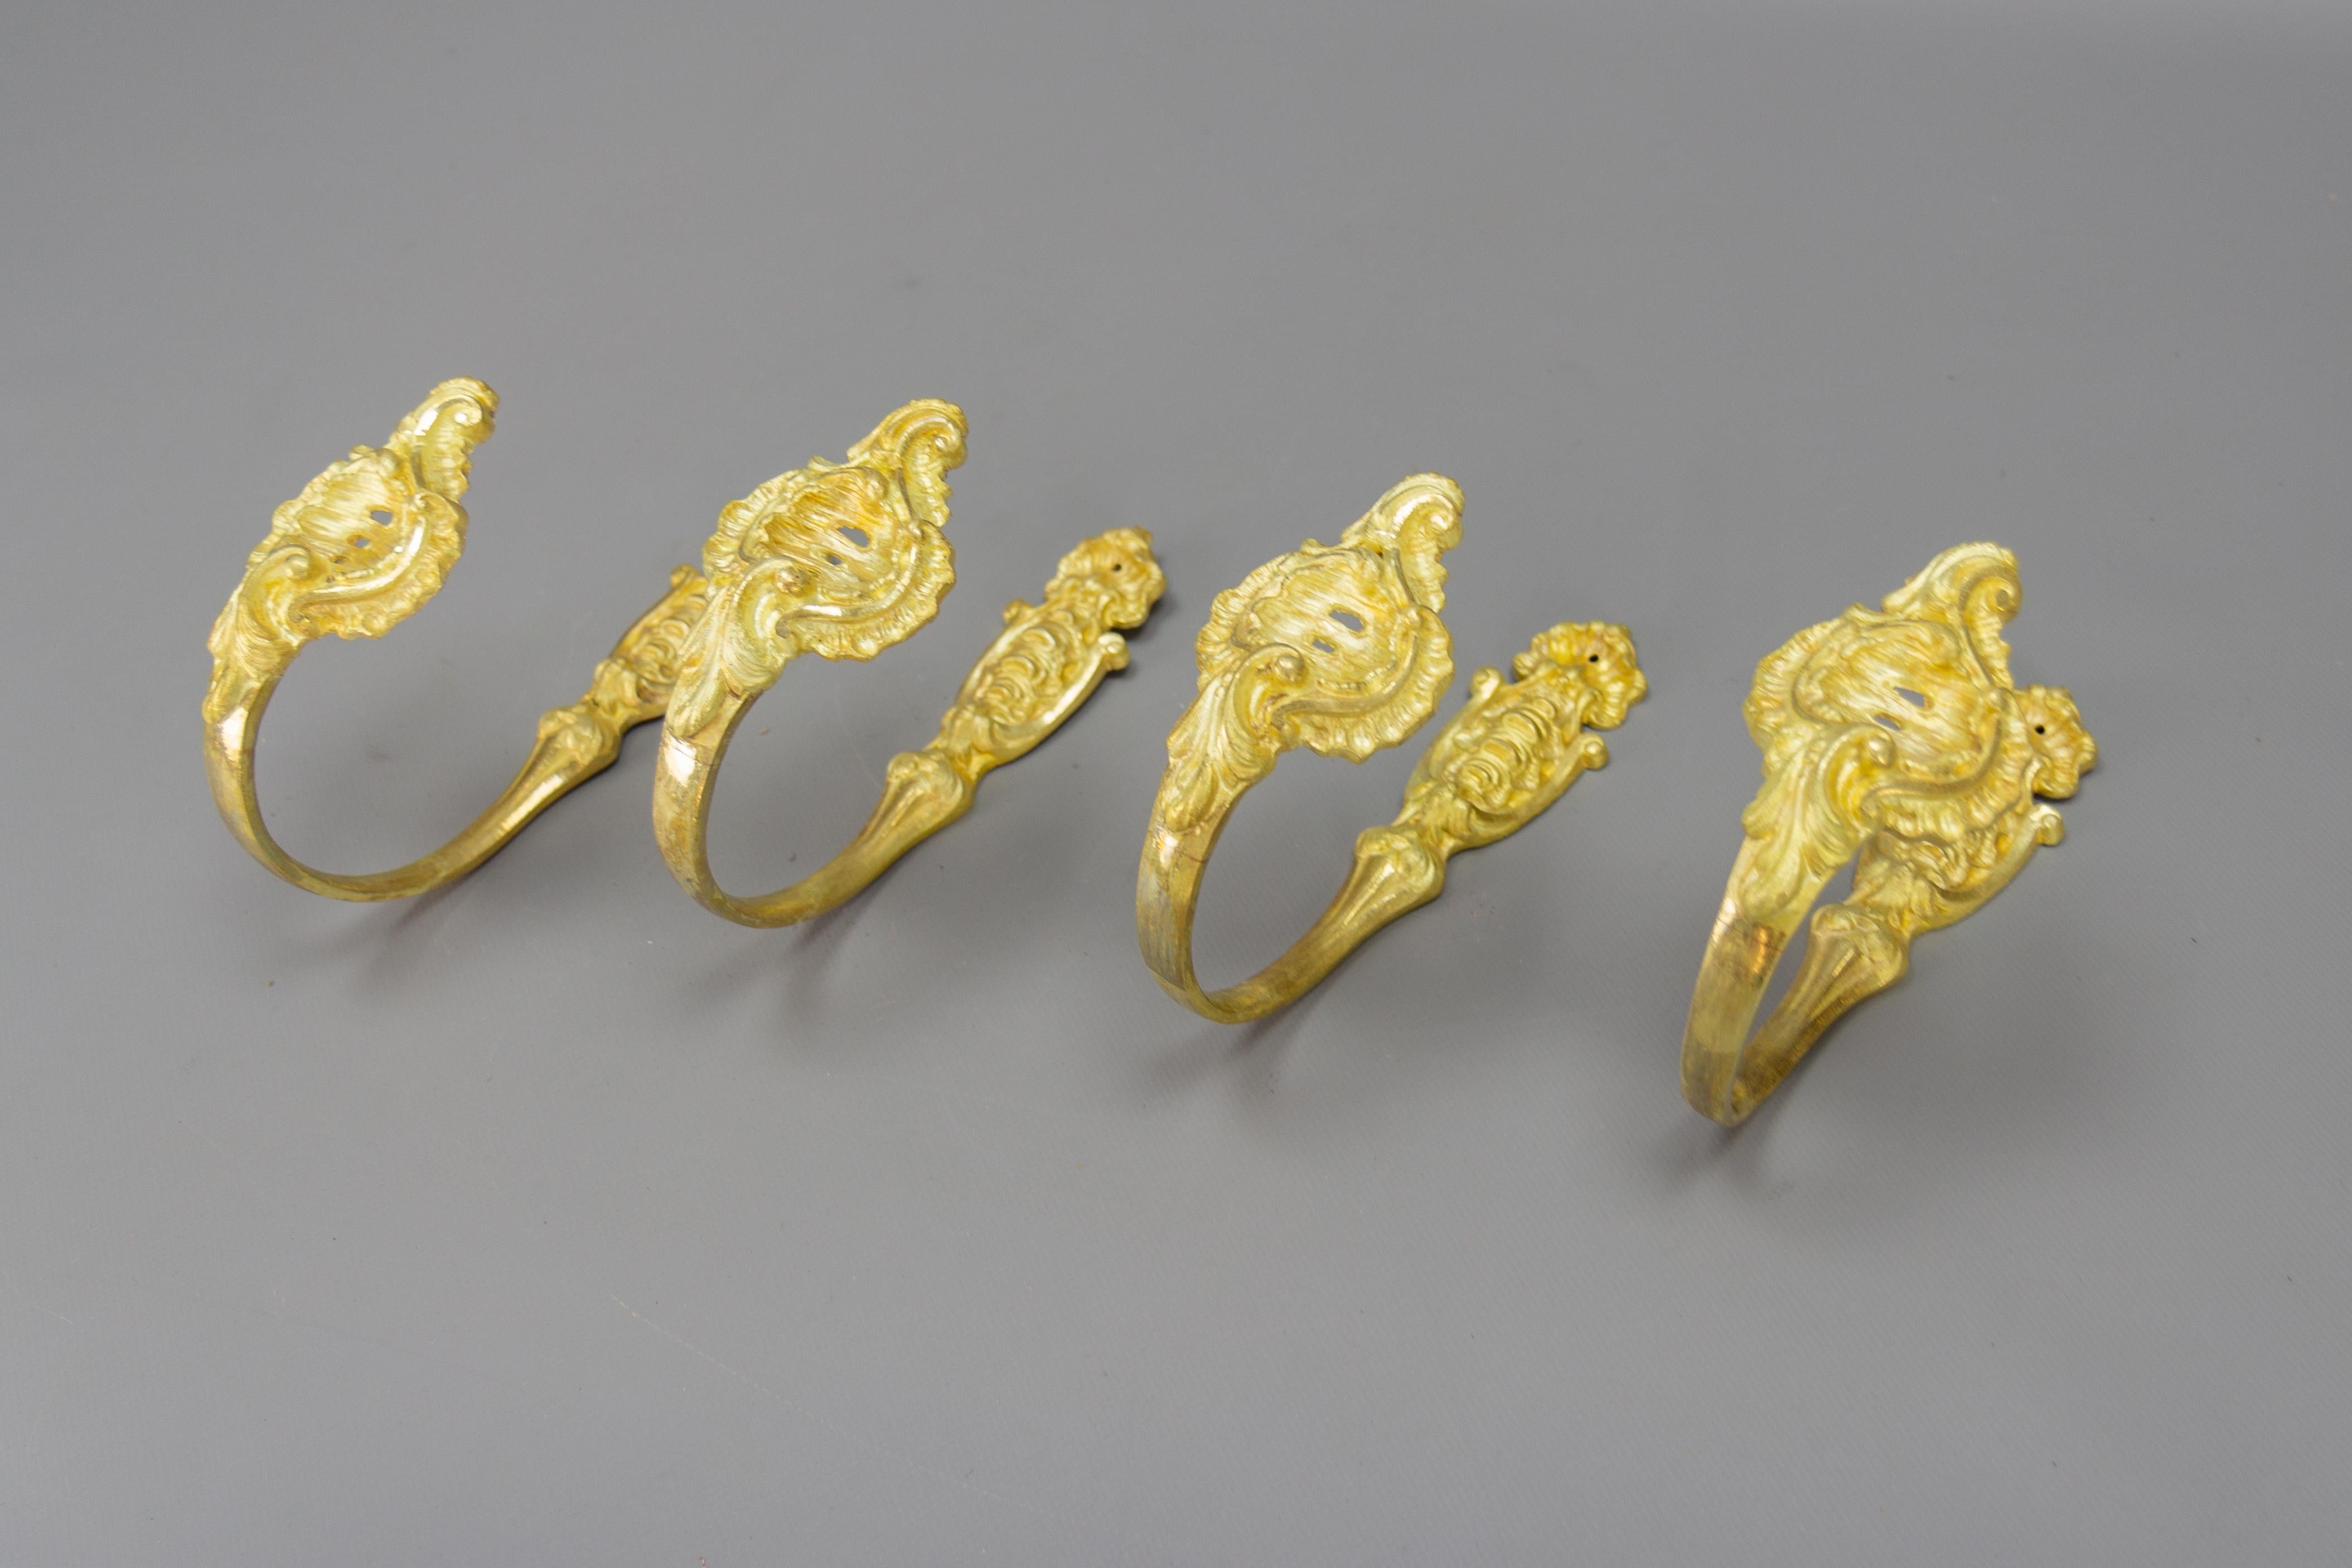 French Rococo Style Gilt Bronze Curtain Tiebacks or Curtain Holders, Set of Four For Sale 5